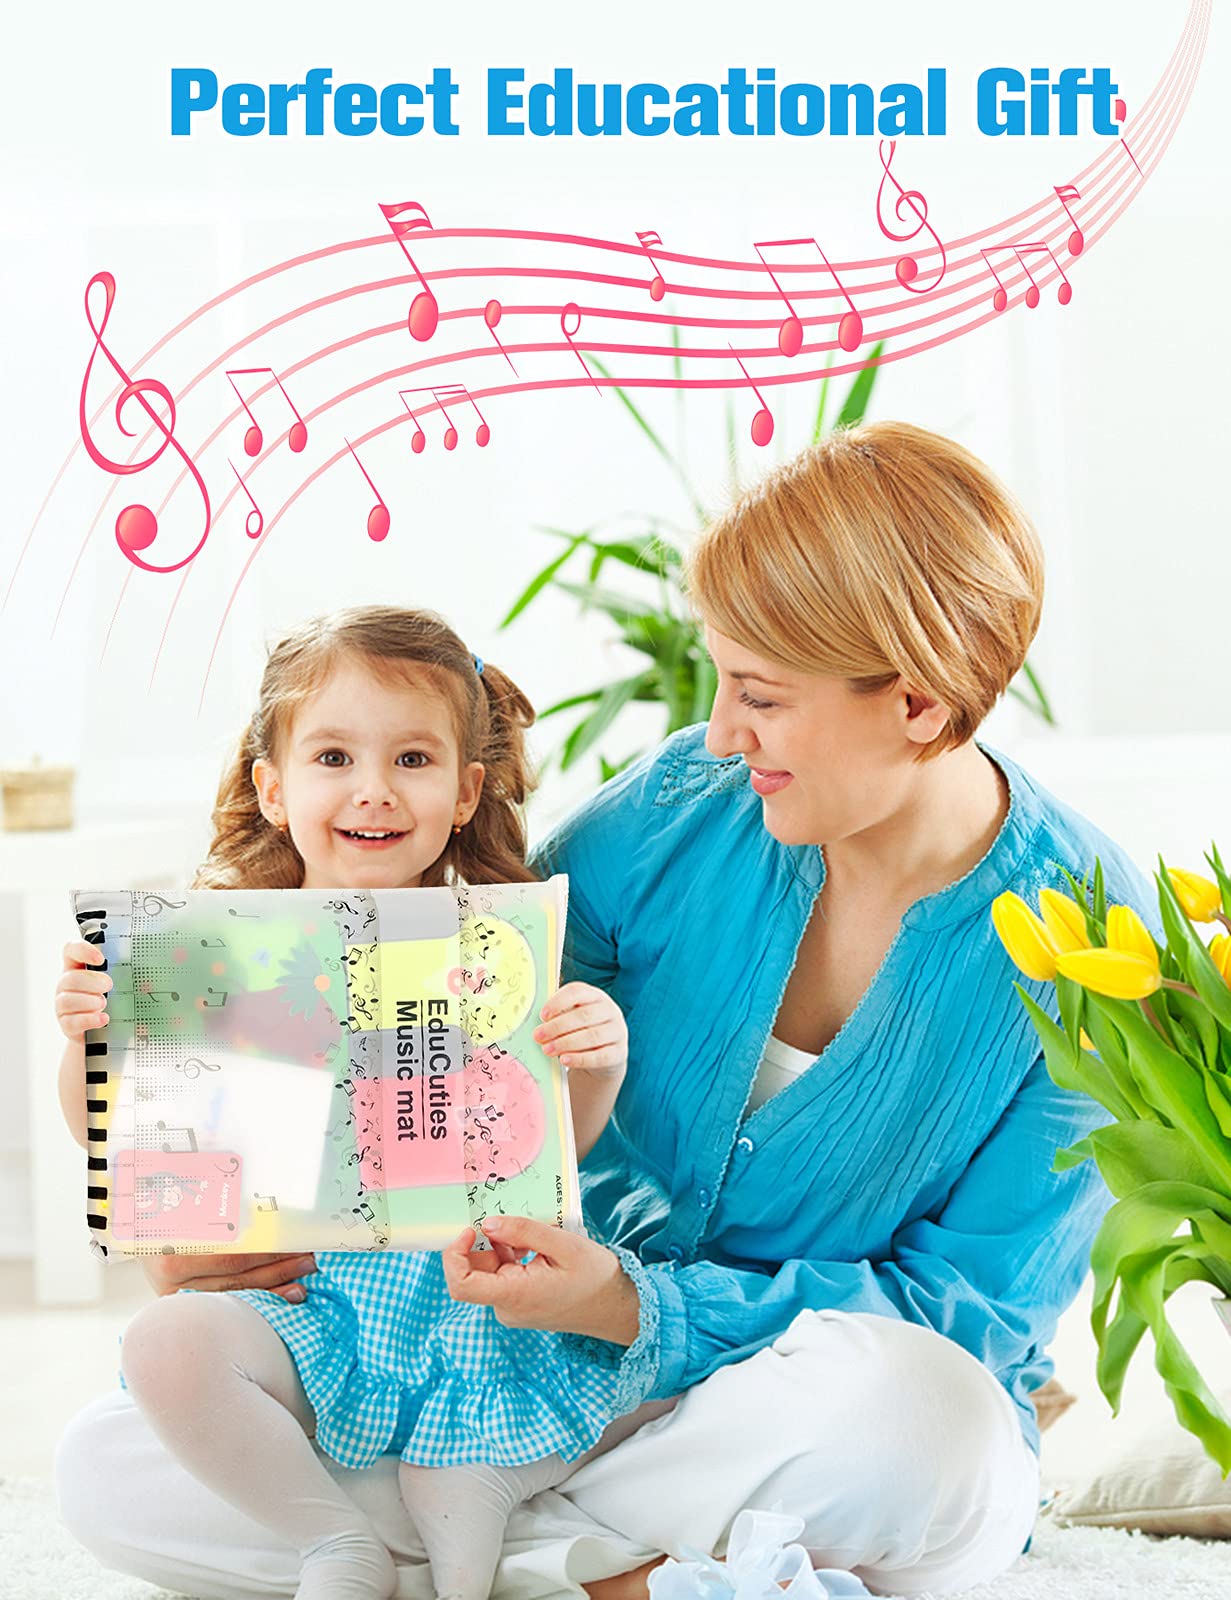 EduCuties Floor Piano Mats, Baby Musical Keyboard Touch Playmat Toys for Toddlers with Different Animal Music Sound for Early Learning Education, Blanket Birthday Gift for Baby Boys Girls